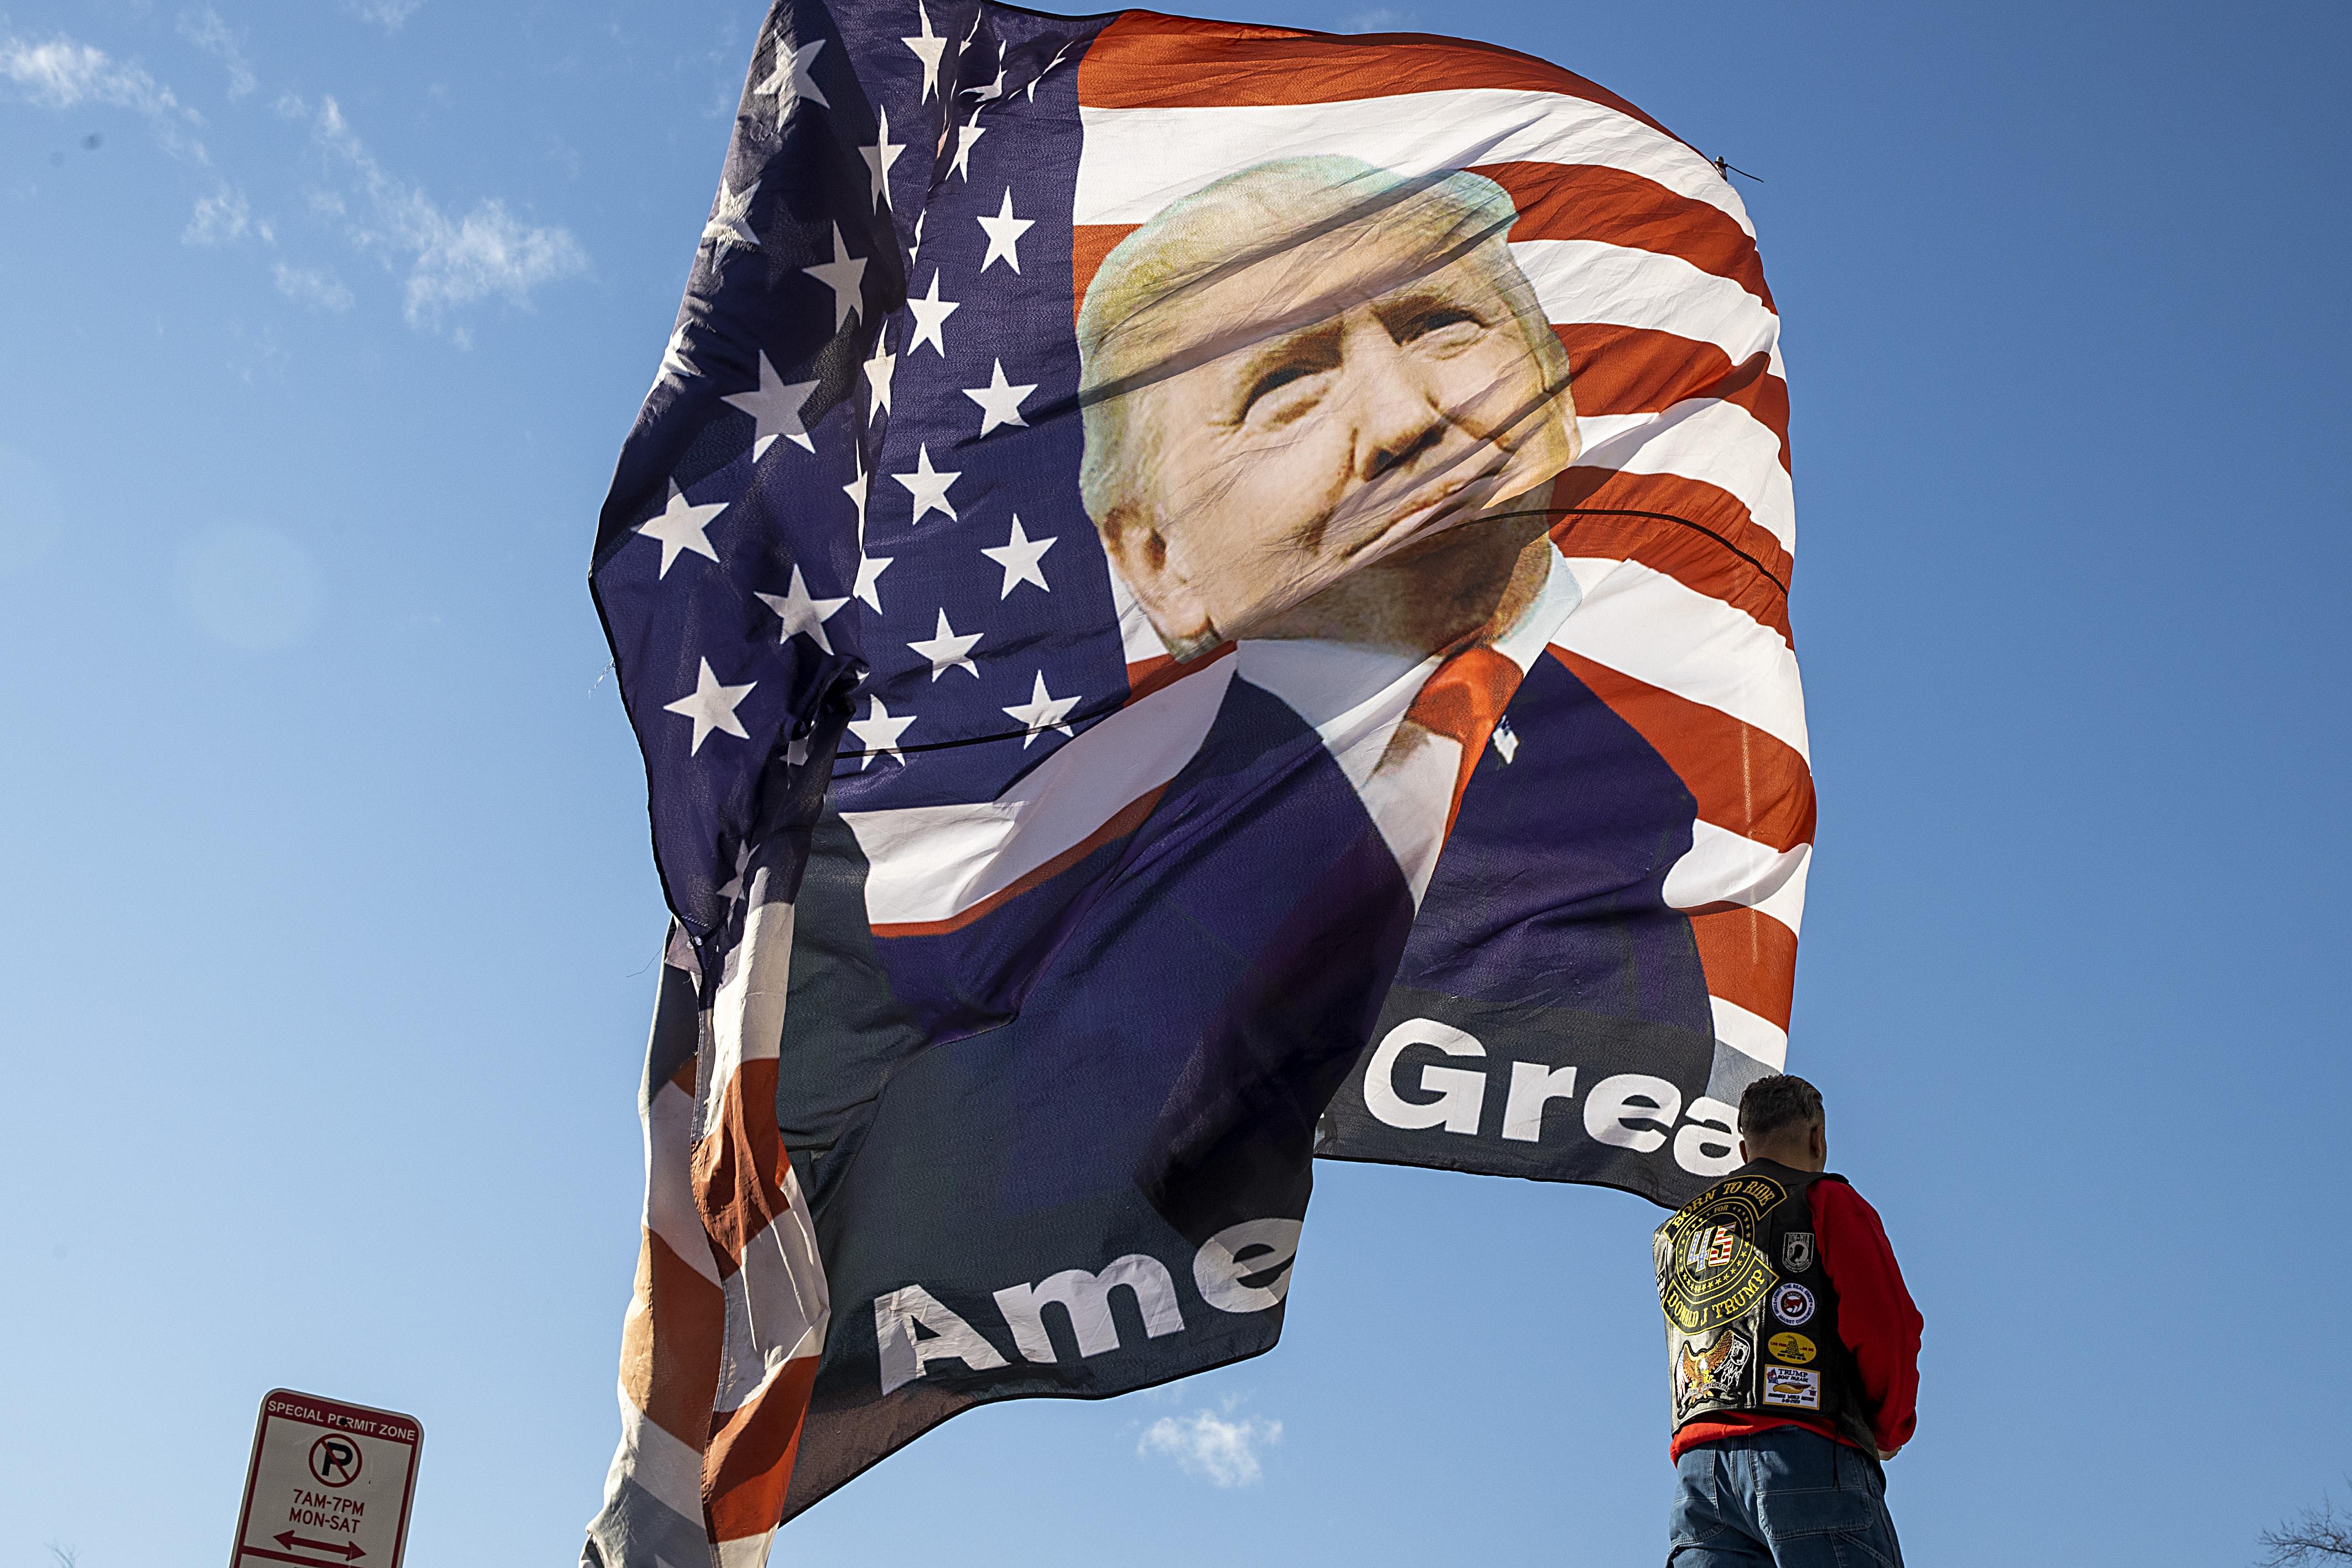 Person standing under a giant MAGA flag with Trump's face on it, waving against a blue sky in Washington